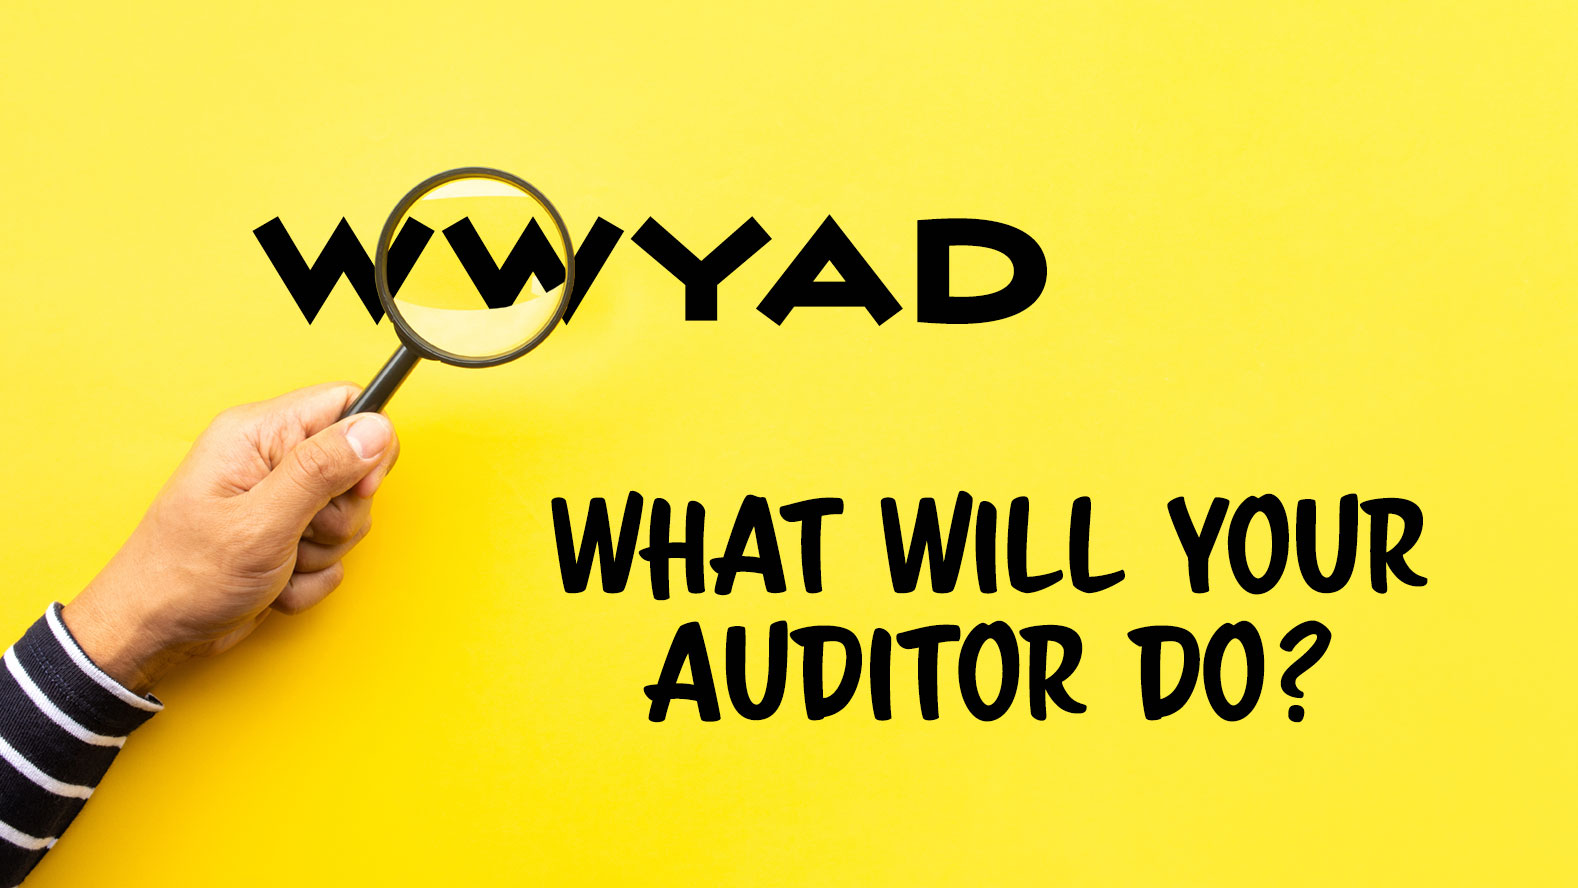 What will your auditor do?